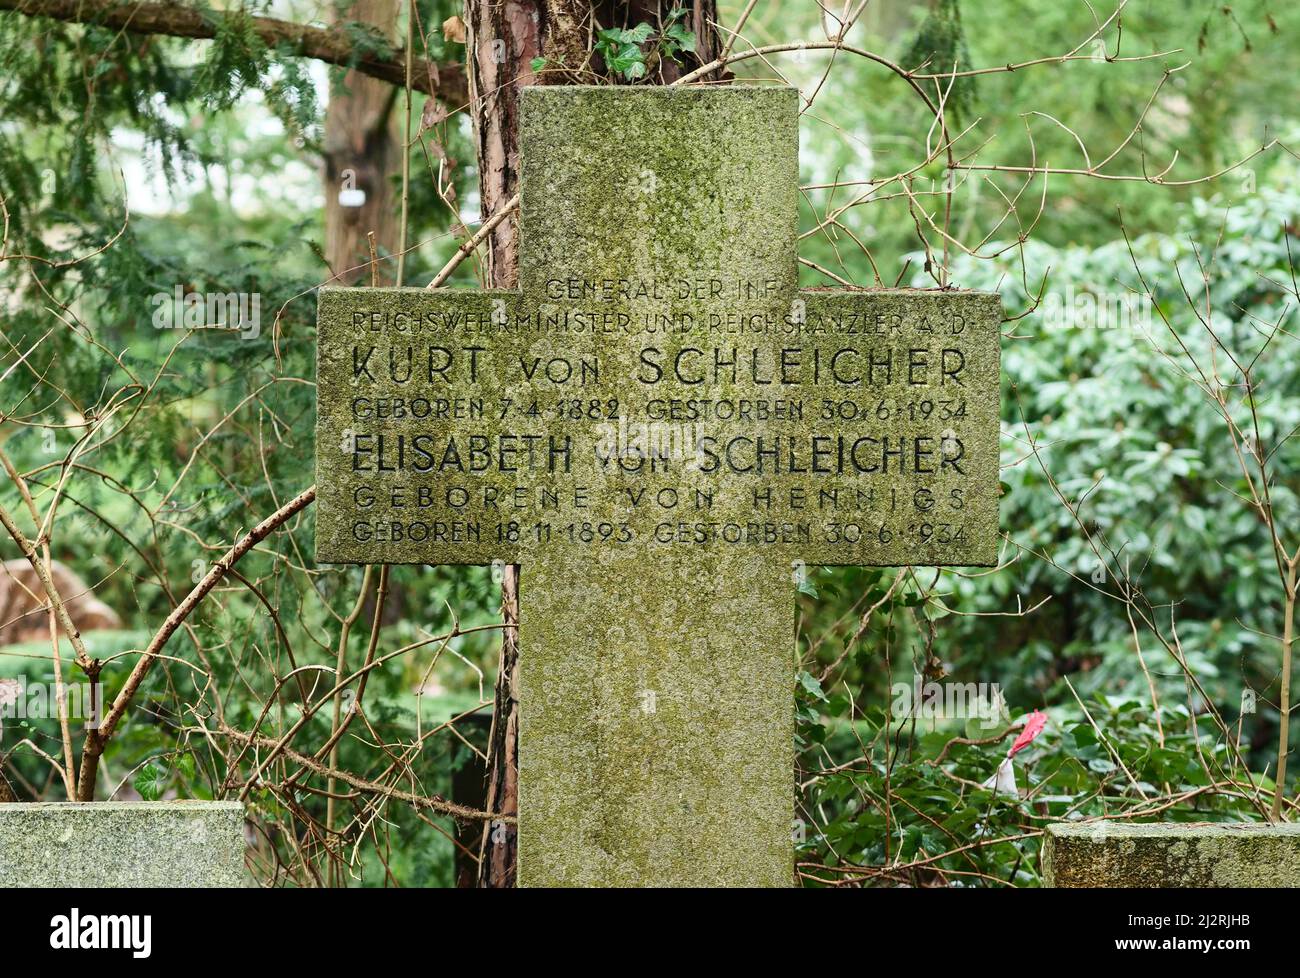 Berlin, Germany. 25th Jan, 2022. Jan. 25, 2022, Berlin. A cross stands on a grave at the Park Cemetery in Lichterfelde, where the urn of the last Chancellor of the Weimar Republic, Kurt von Schleicher, was presumably buried.Schleicher and his wife Elisabeth were assassinated in their home by members of the notorious Security Service of the Reichsführer SS (SD) in 1934 in the course of the so-called 'Röhm Putsch.' Credit: Wolfram Steinberg/dpa Credit: Wolfram Steinberg/dpa/Alamy Live News Stock Photo